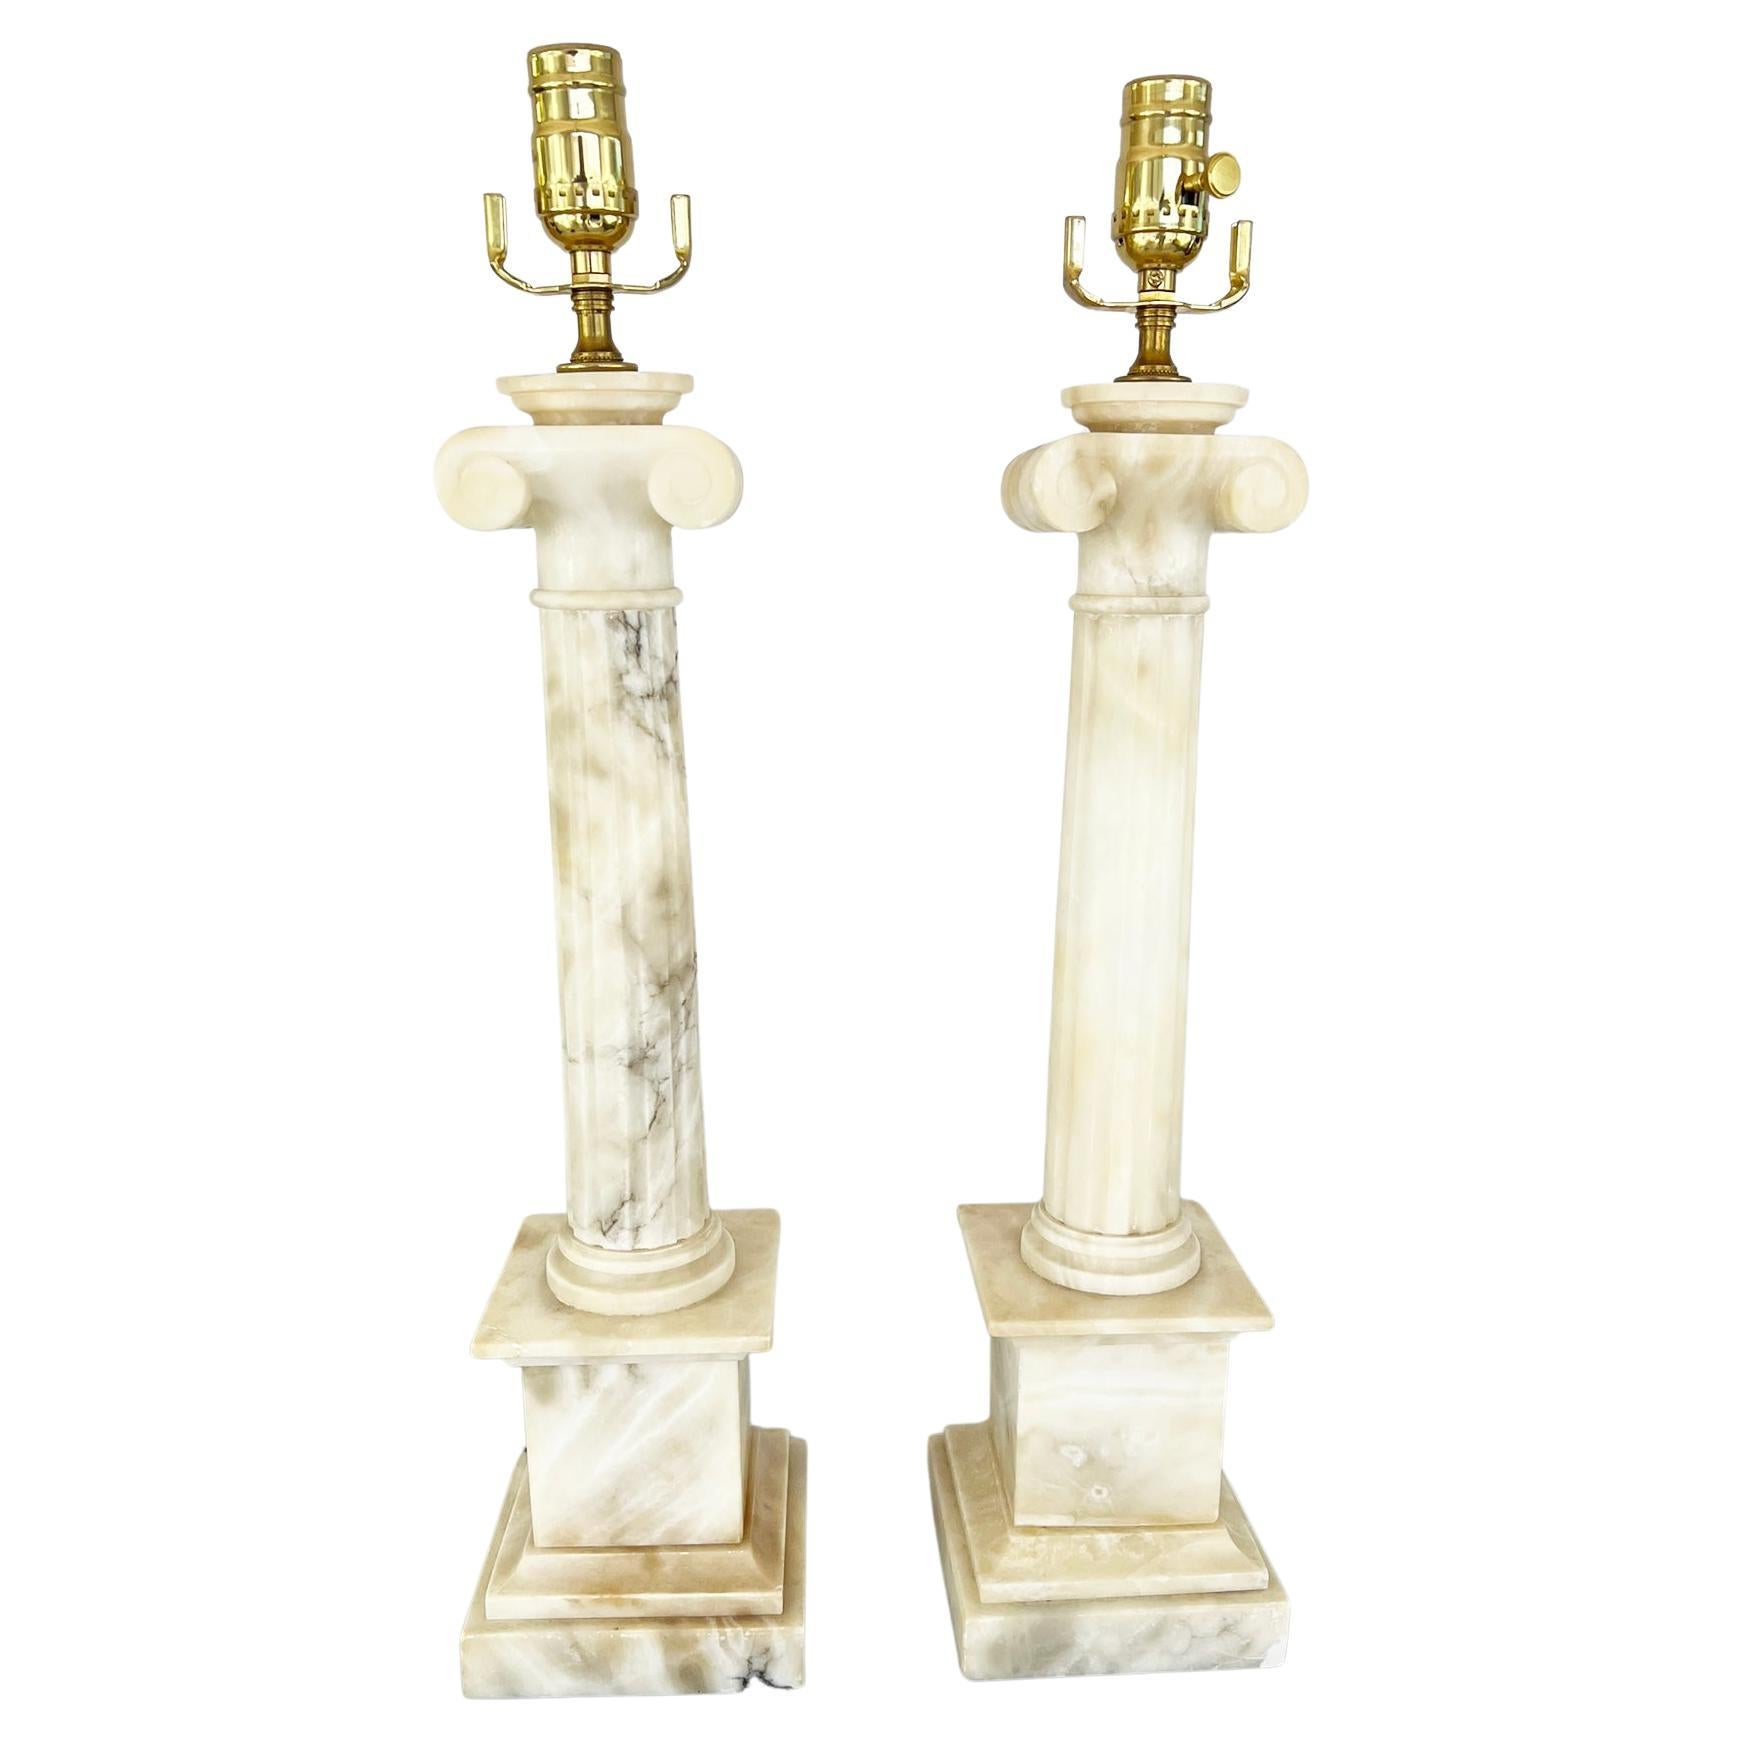 Pair of Carved Alabaster Columnar Lamps with Ionic Capitals